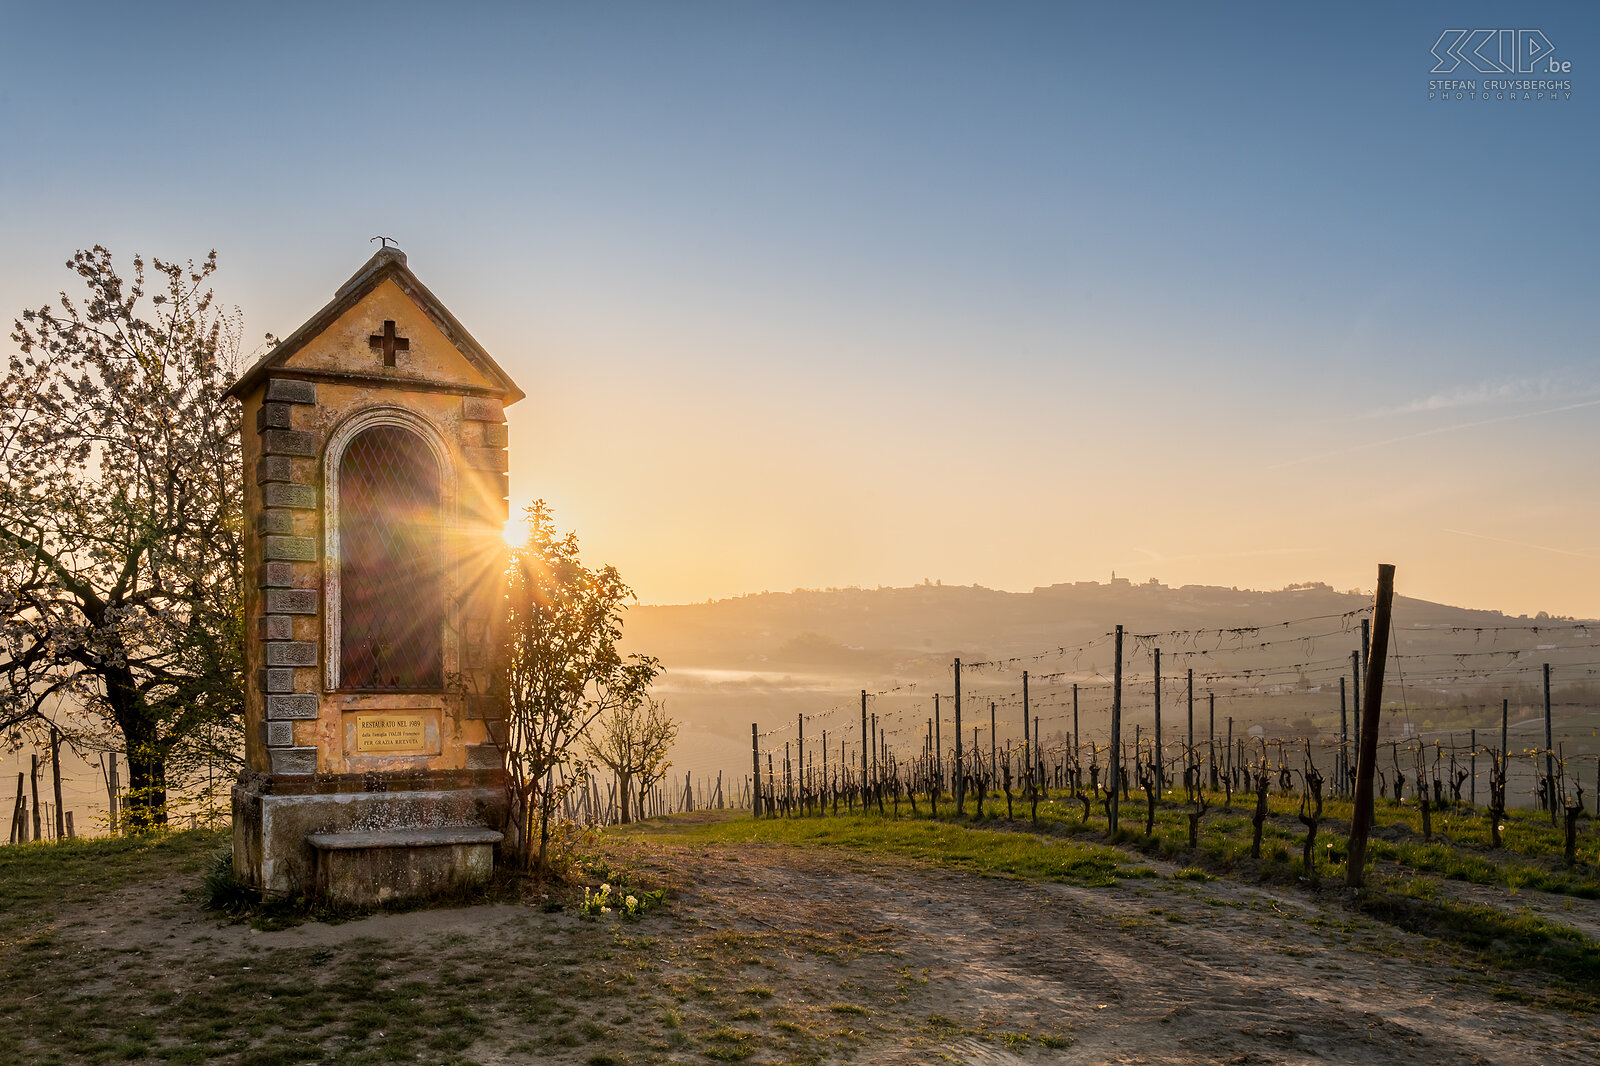 Grinzane Cavour - Field chapel Sunrise at the lovely field chapel in the vineyards around Grinzane Cavour Stefan Cruysberghs